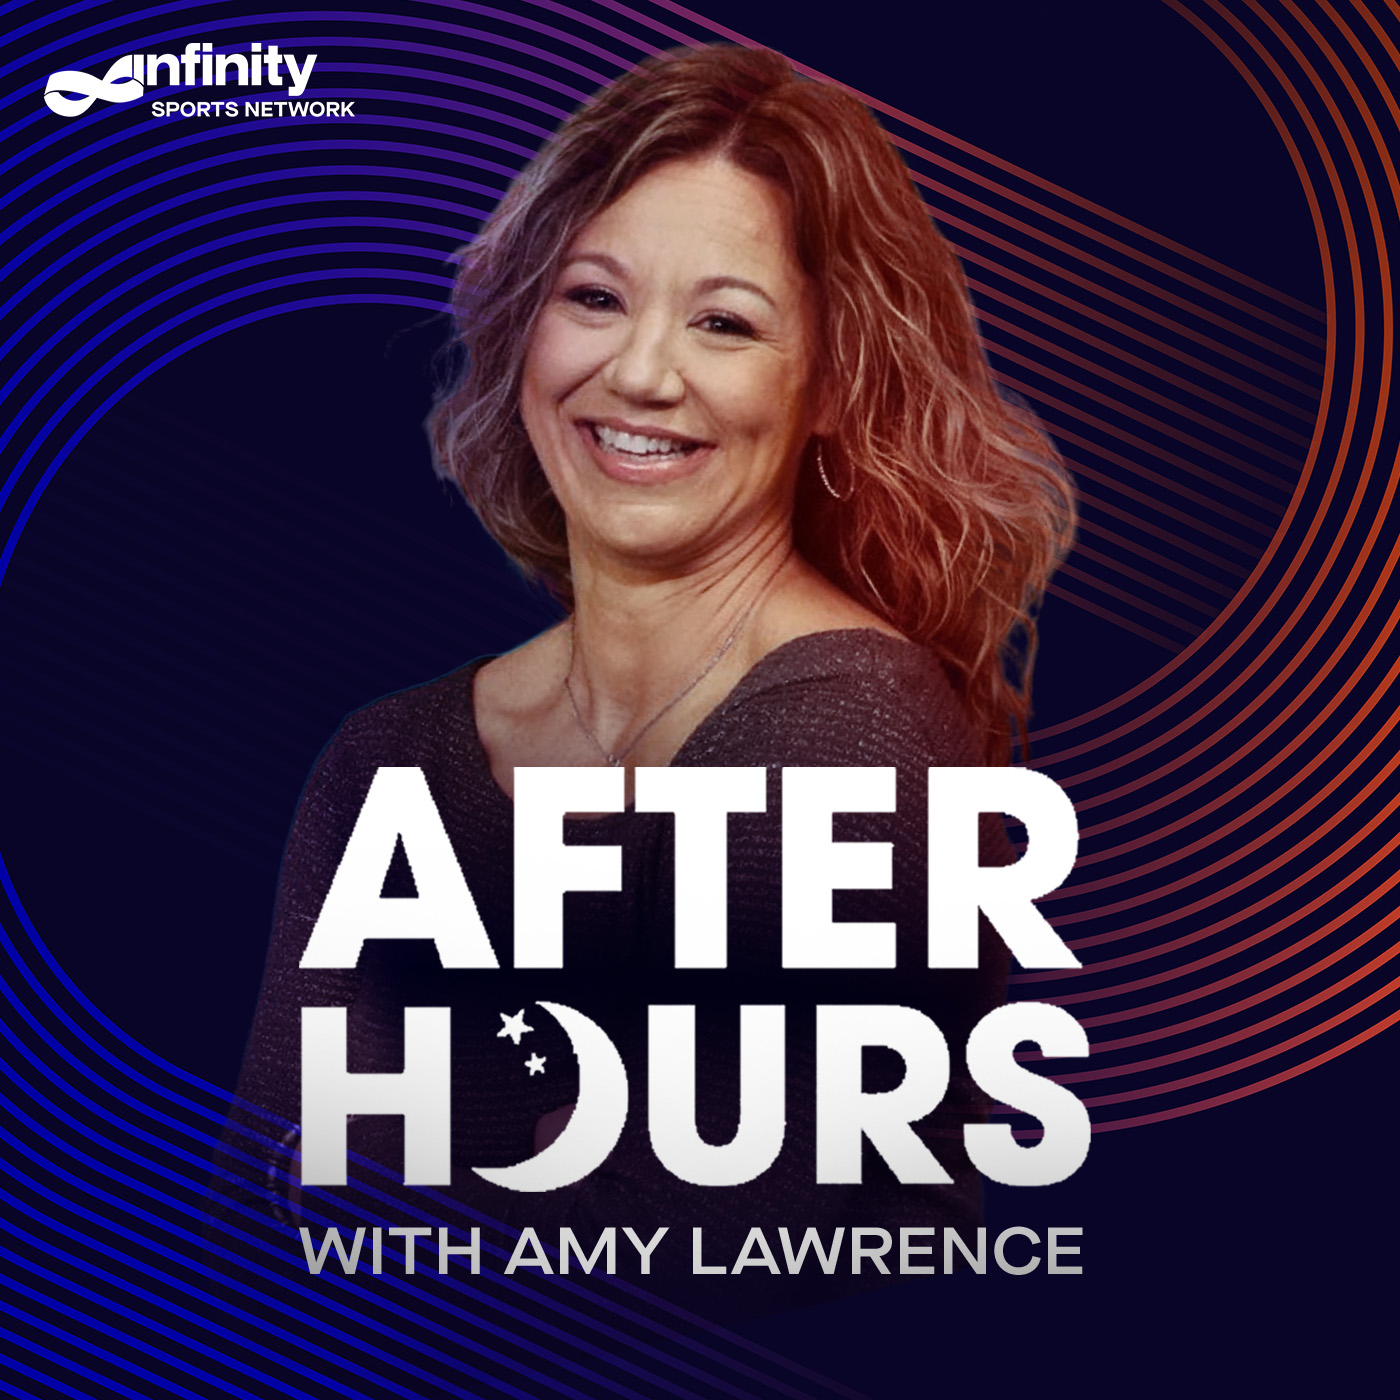 12-14-21 After Hours with Amy Lawrence PODCAST: Hour 3